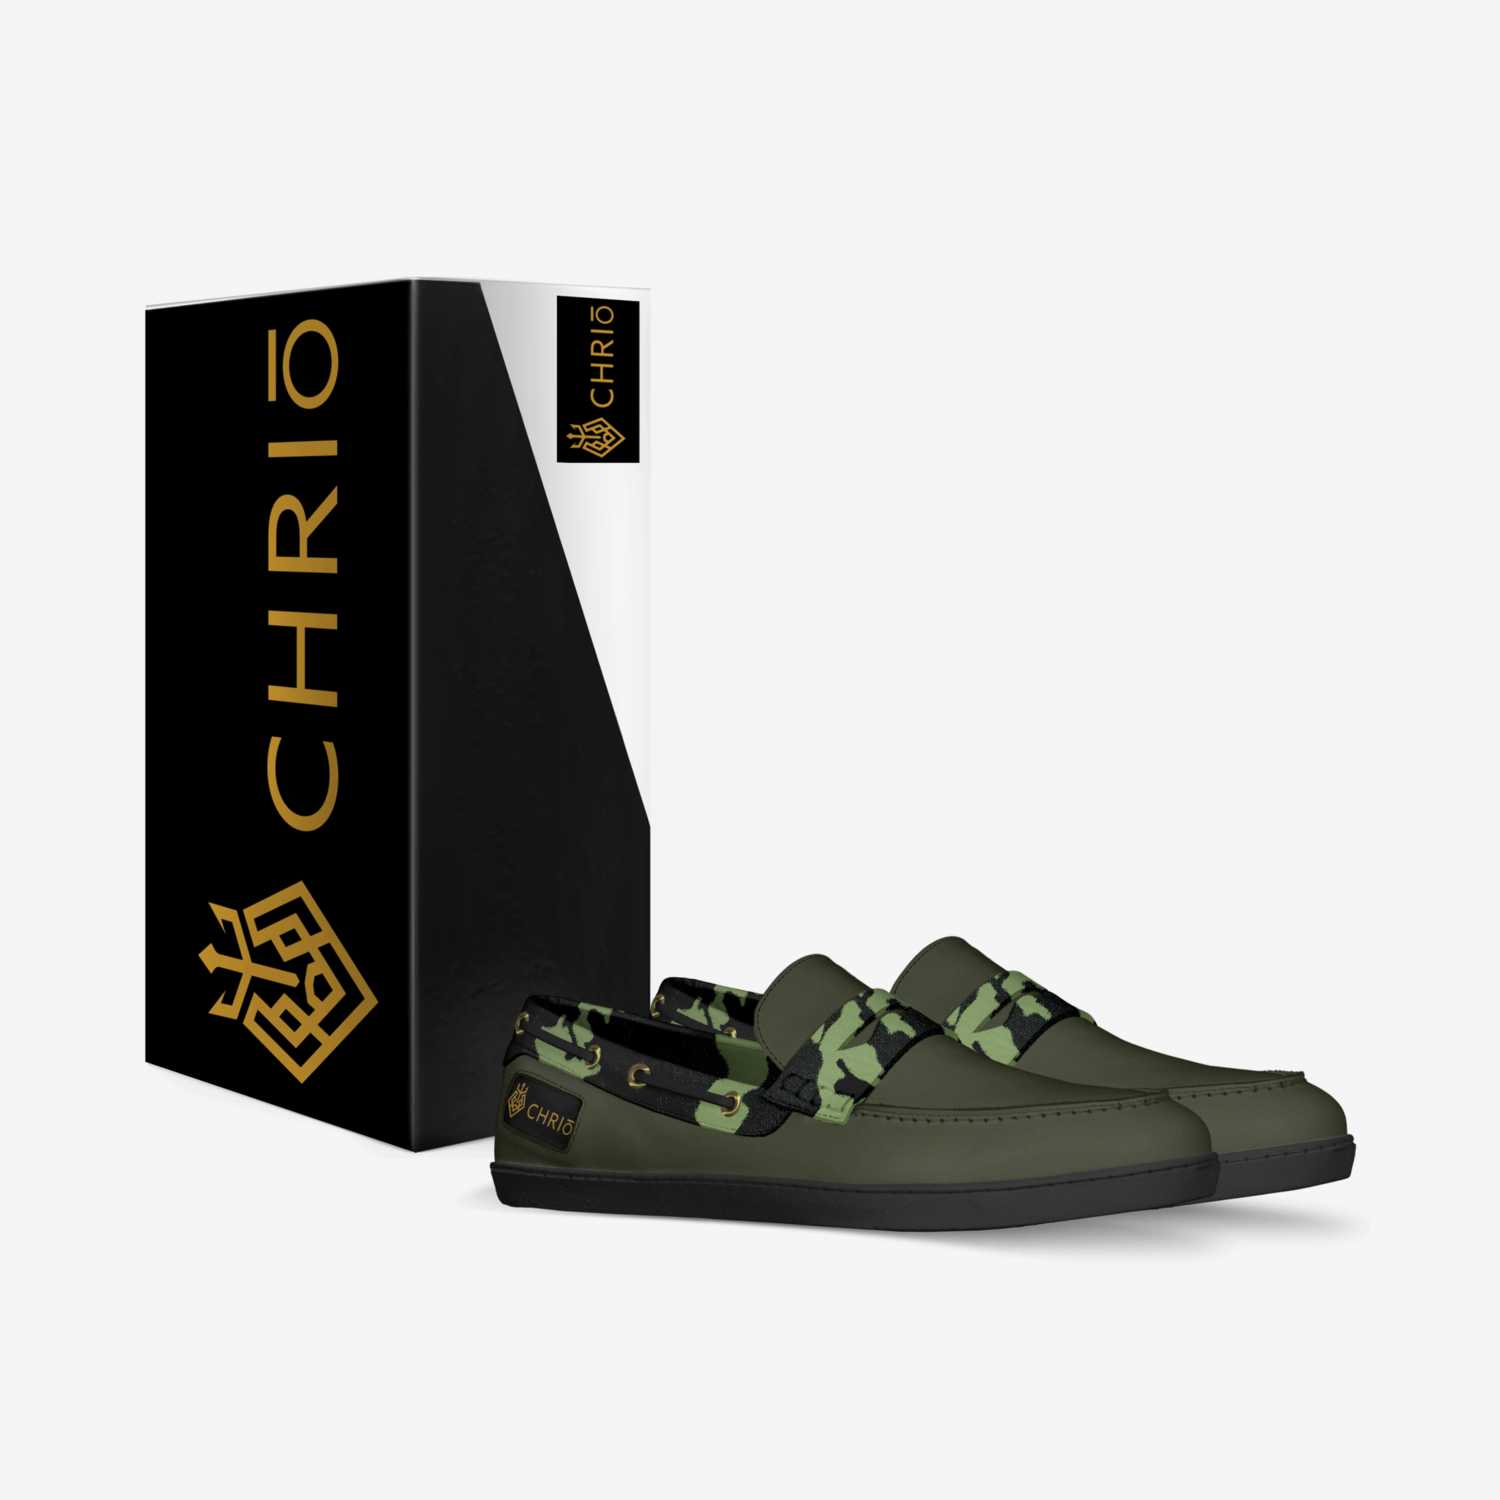 CHRIŌ custom made in Italy shoes by Hakeem Collins | Box view